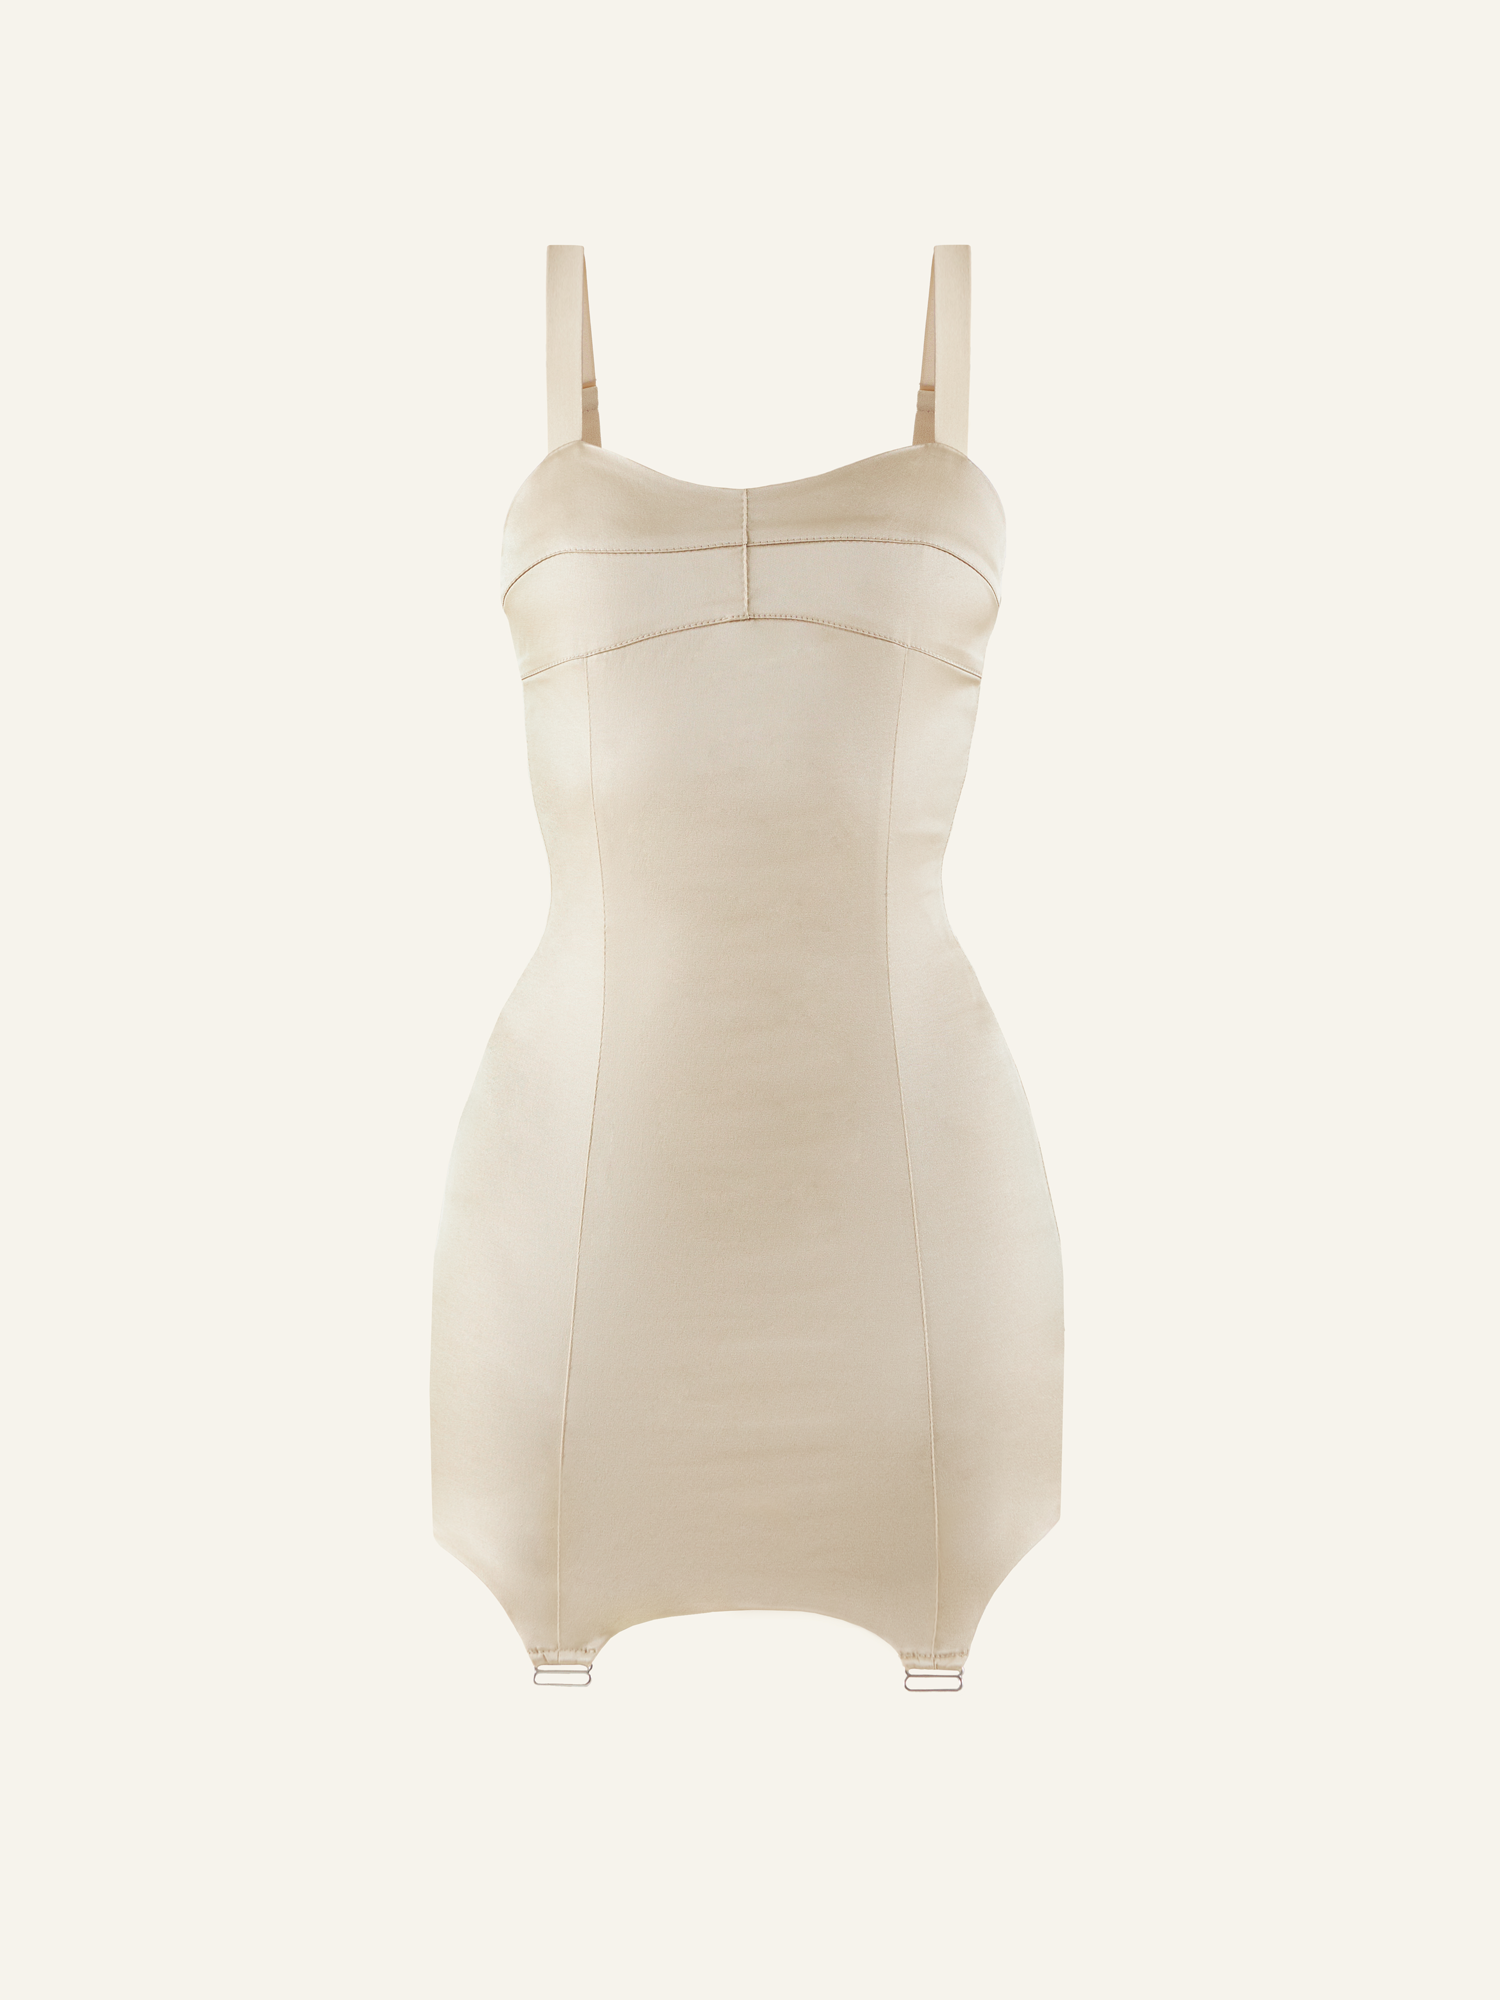 Product photo of a beige dress, featuring shorts underneath